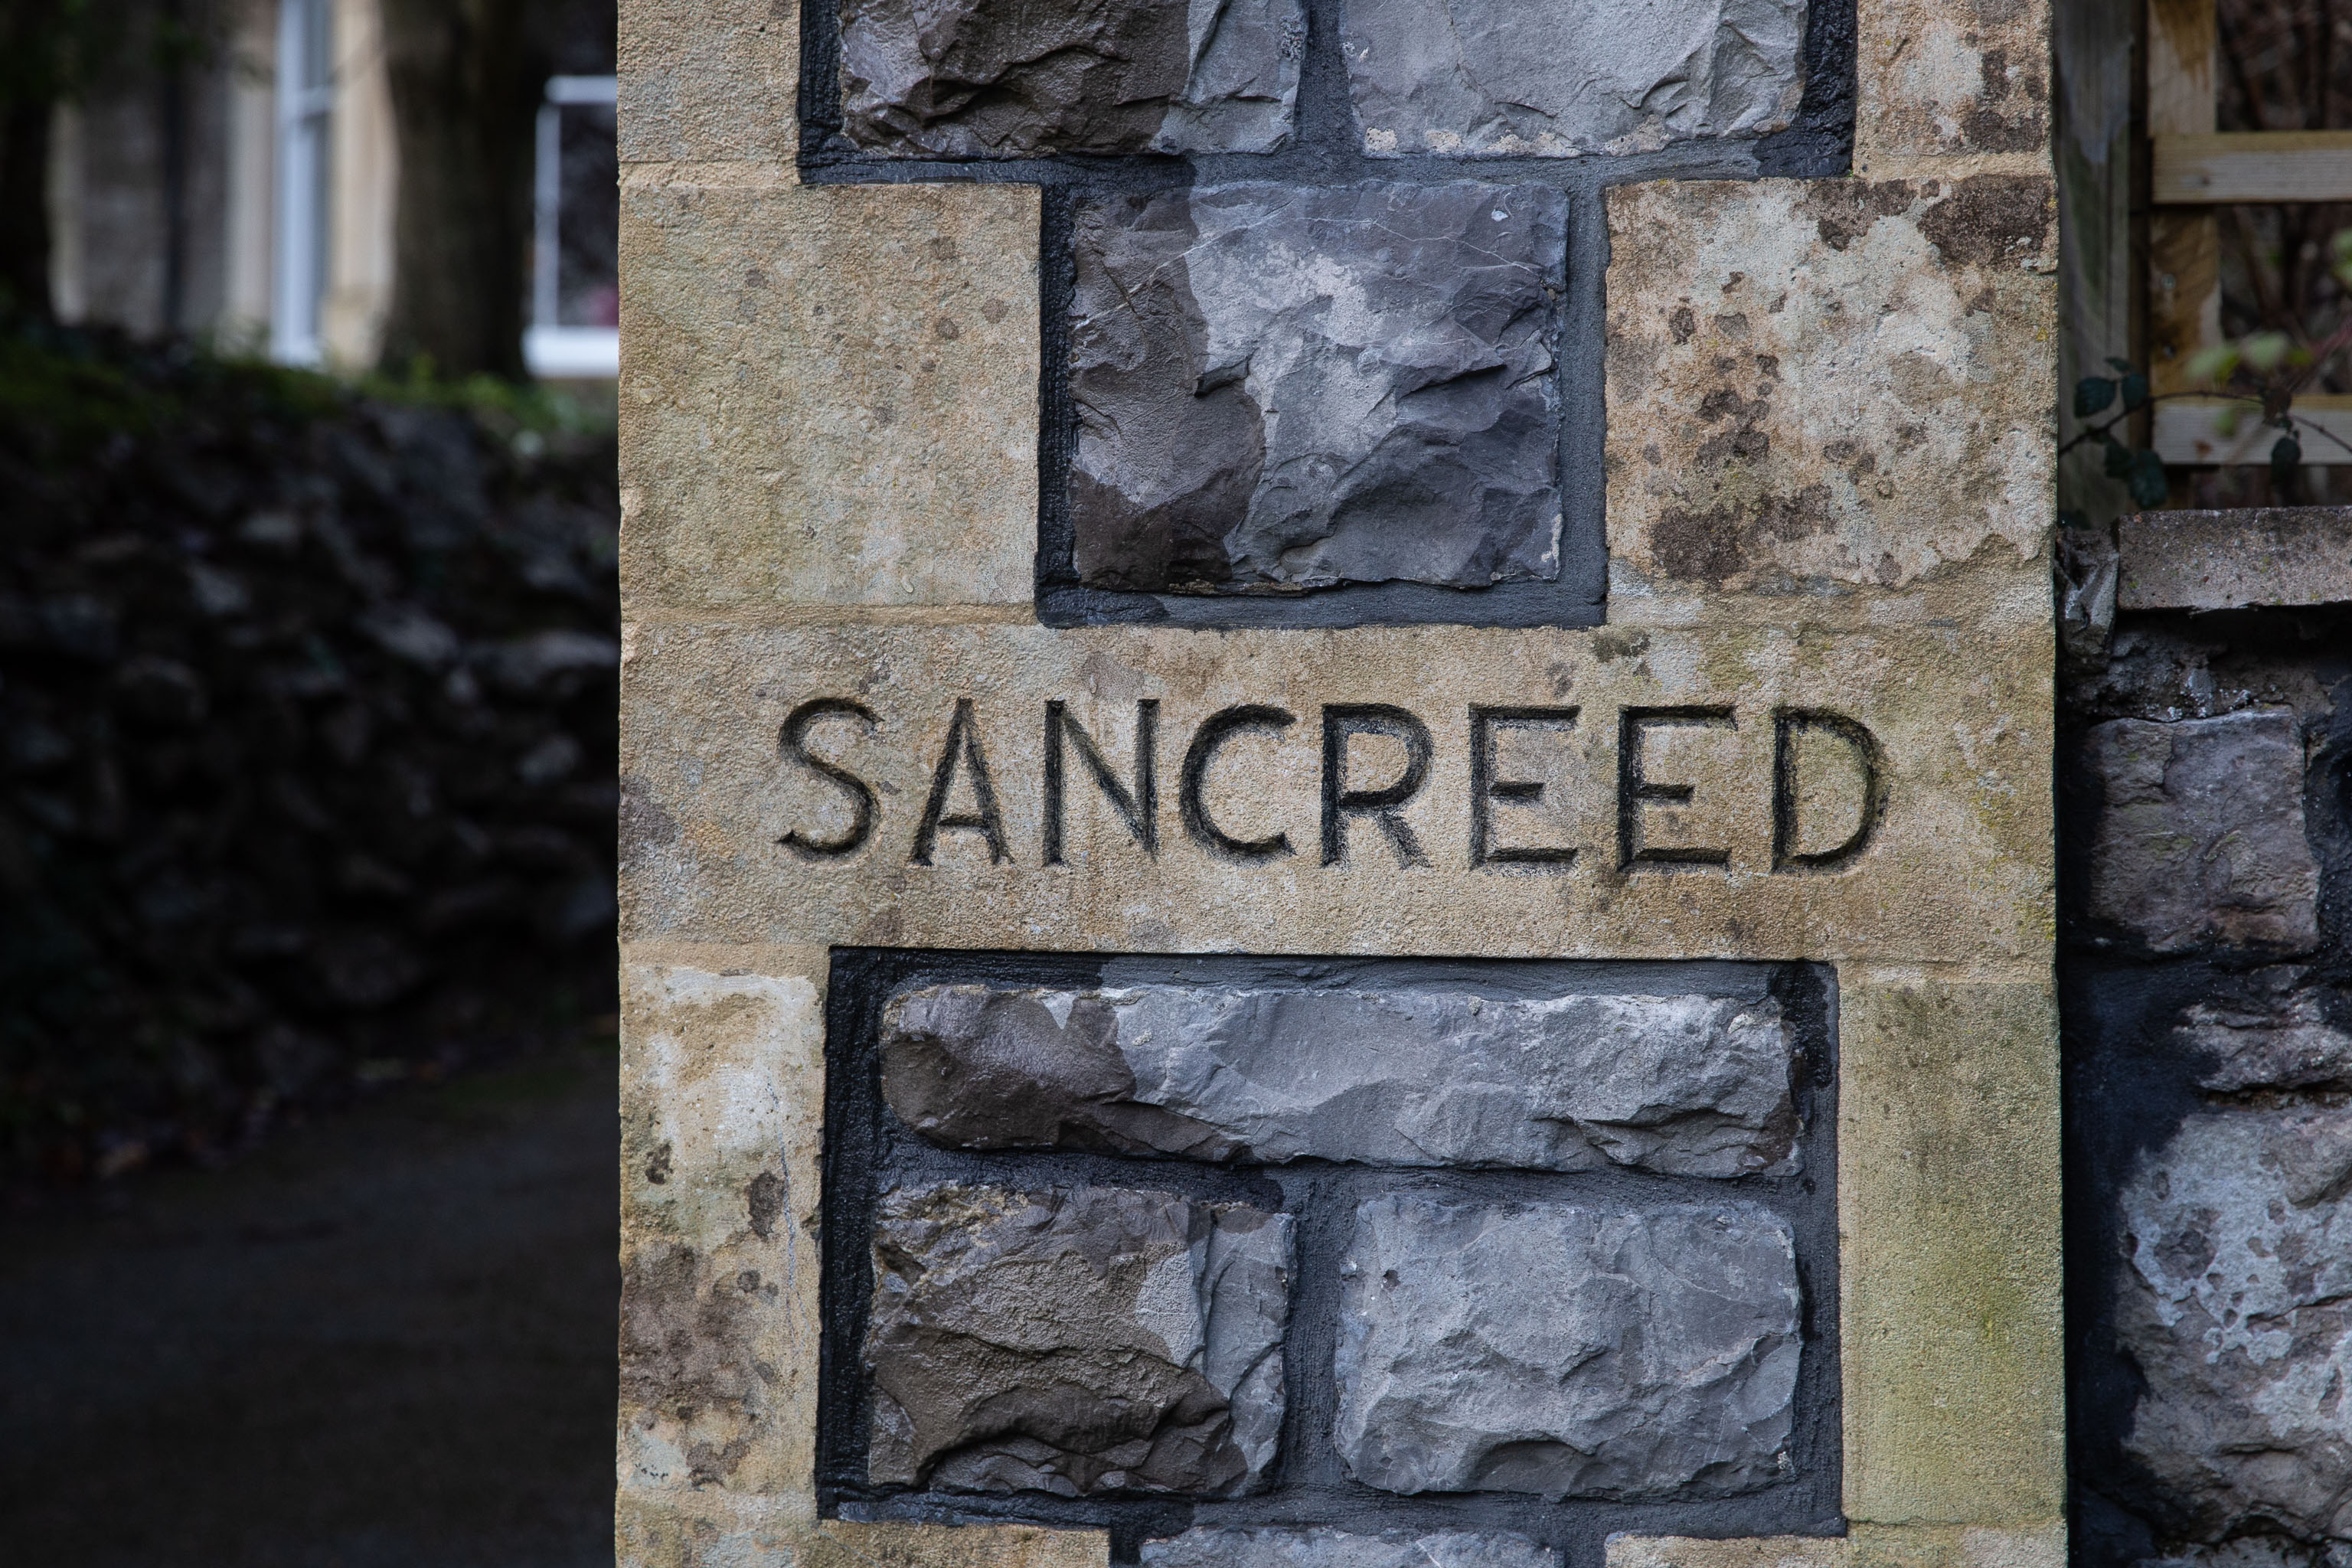 SANCREED
Never heard of the place before I looked it up just now, but apparently Sancreed is a village in Cornwall, 5km west of Penzance.
